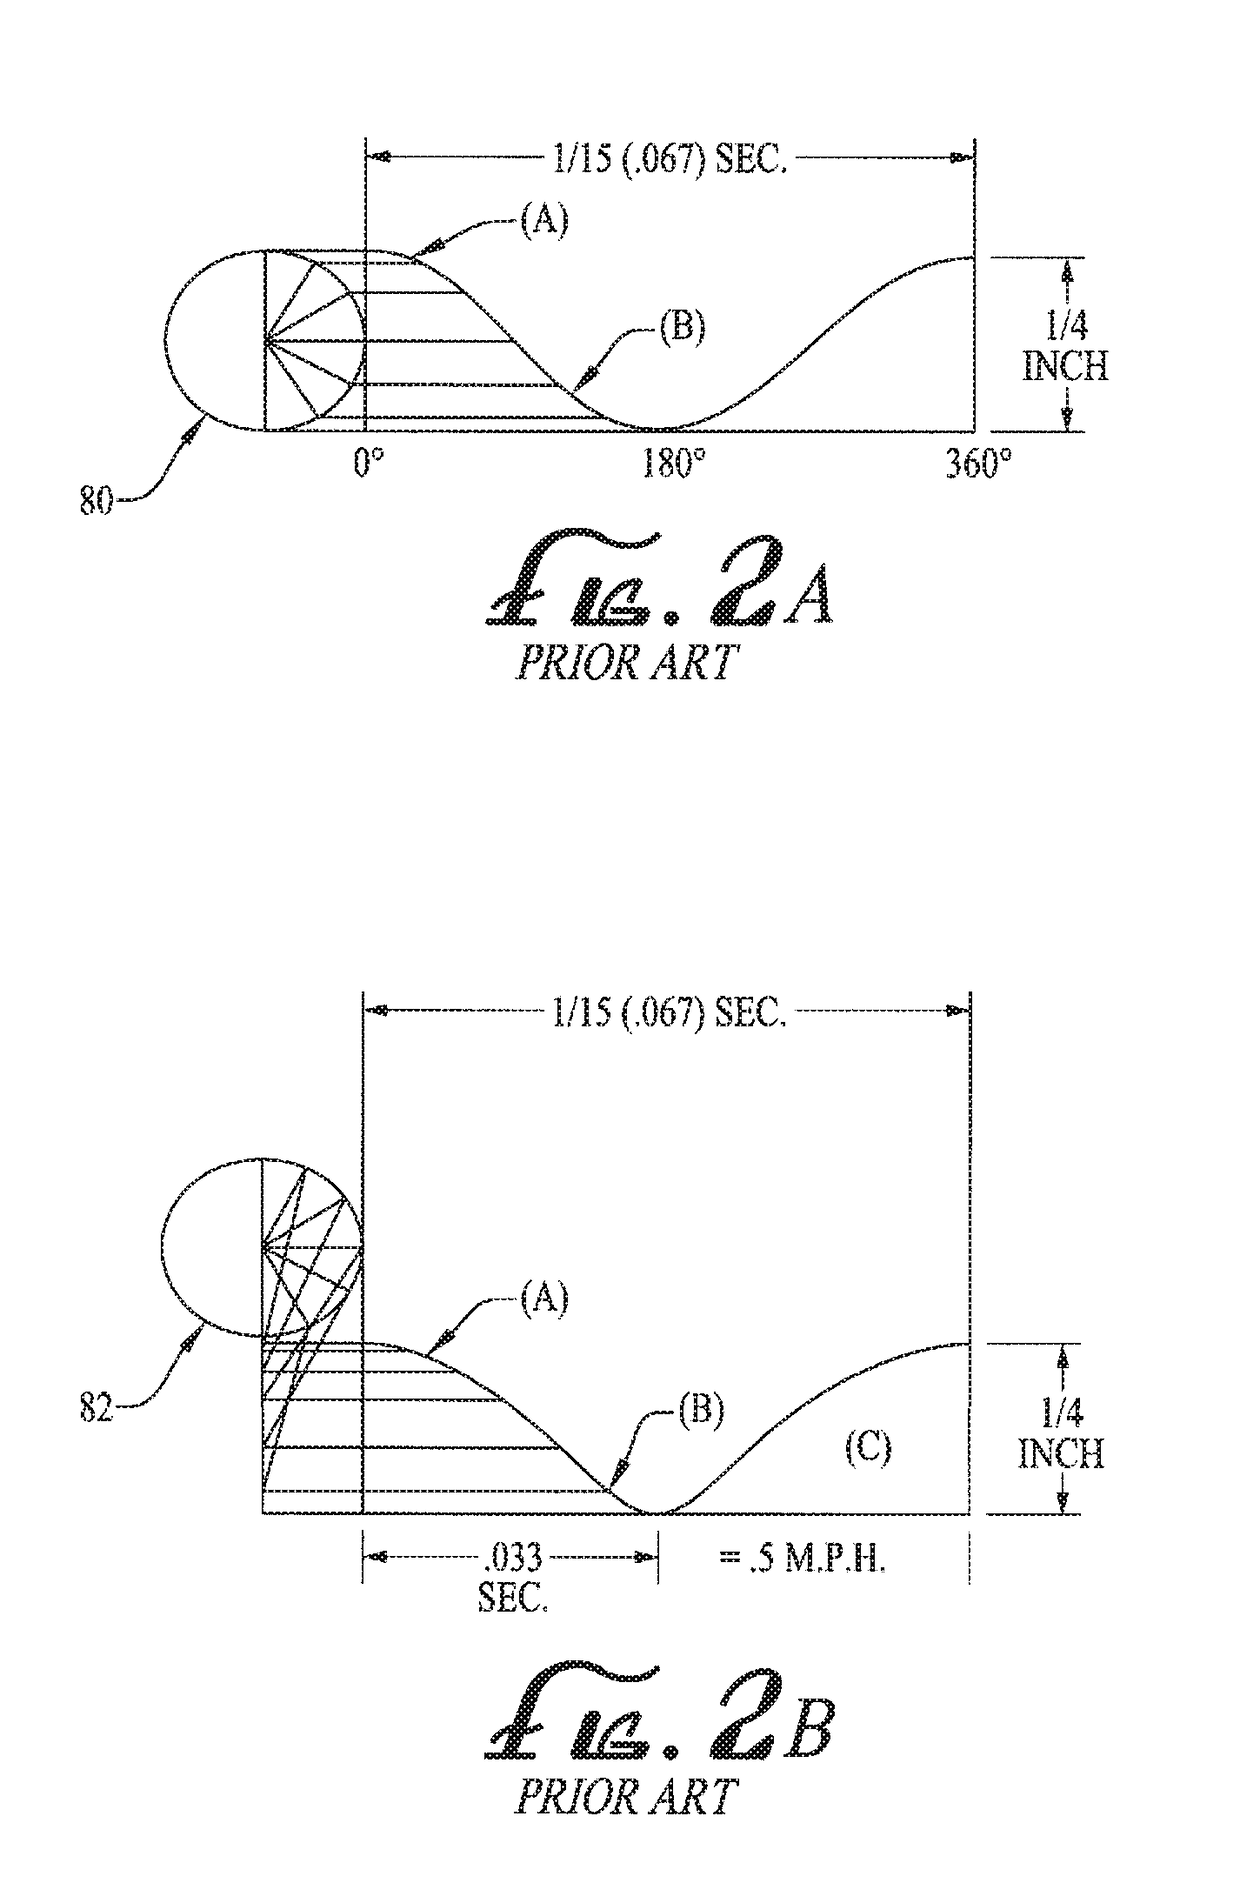 Device for delivery of resonant frequencies to treated muscles